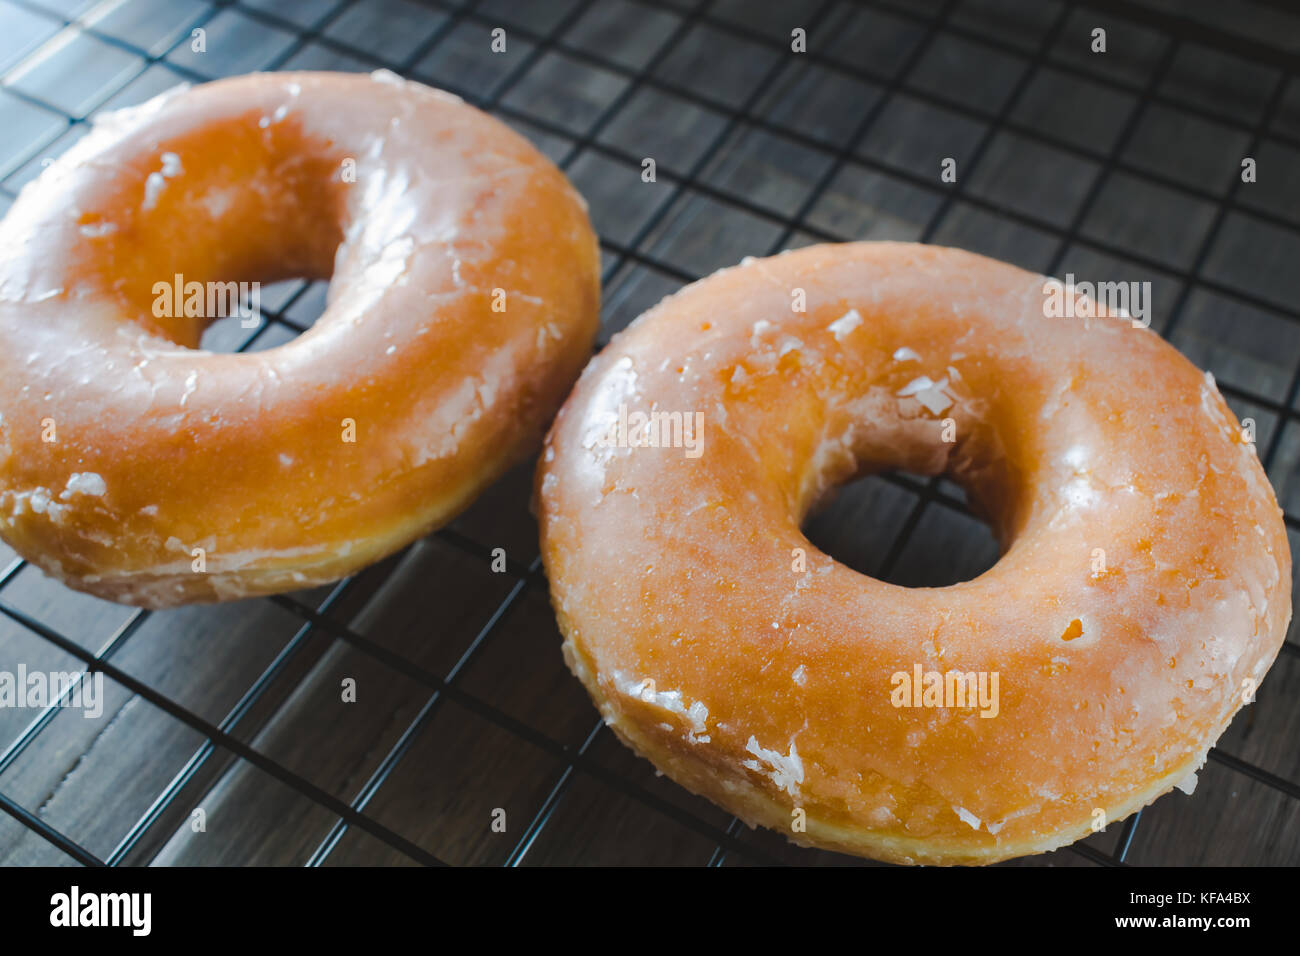 Donuts on Cooling Rack; Doughnut on Wire Rack Stock Photo - Alamy